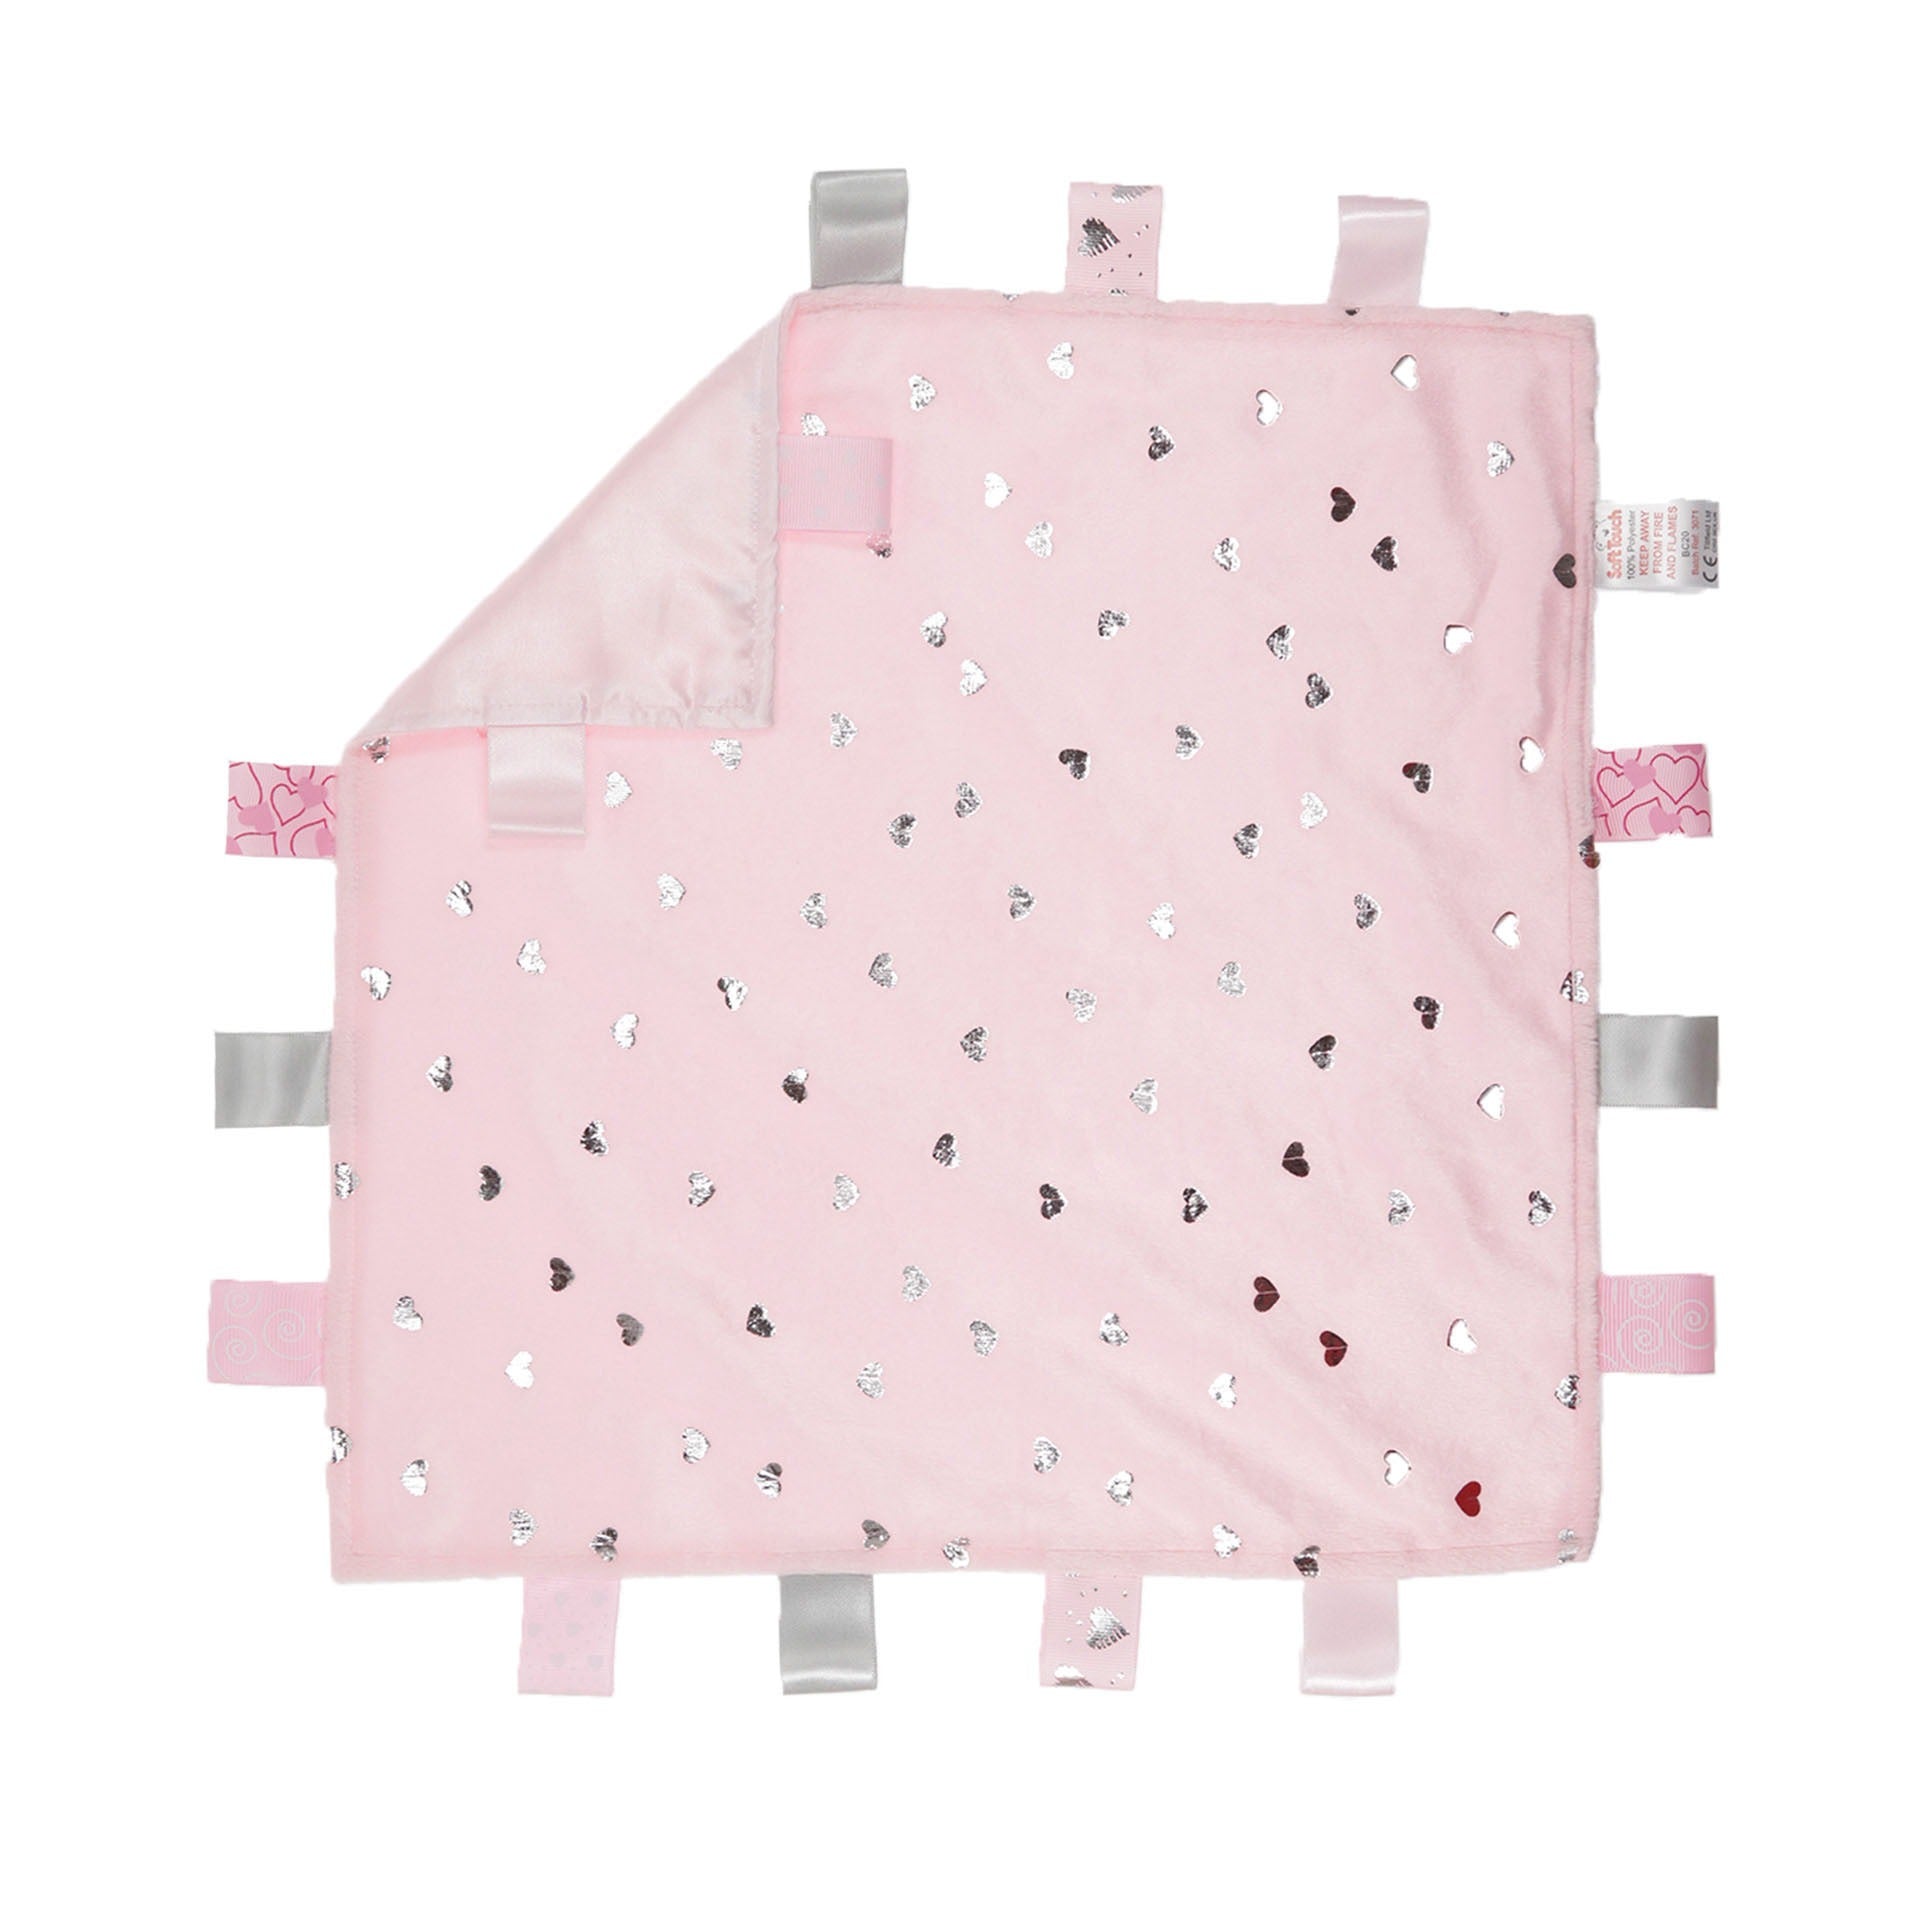 View 12x Pink Comforter with Hearts Print Ribbons information